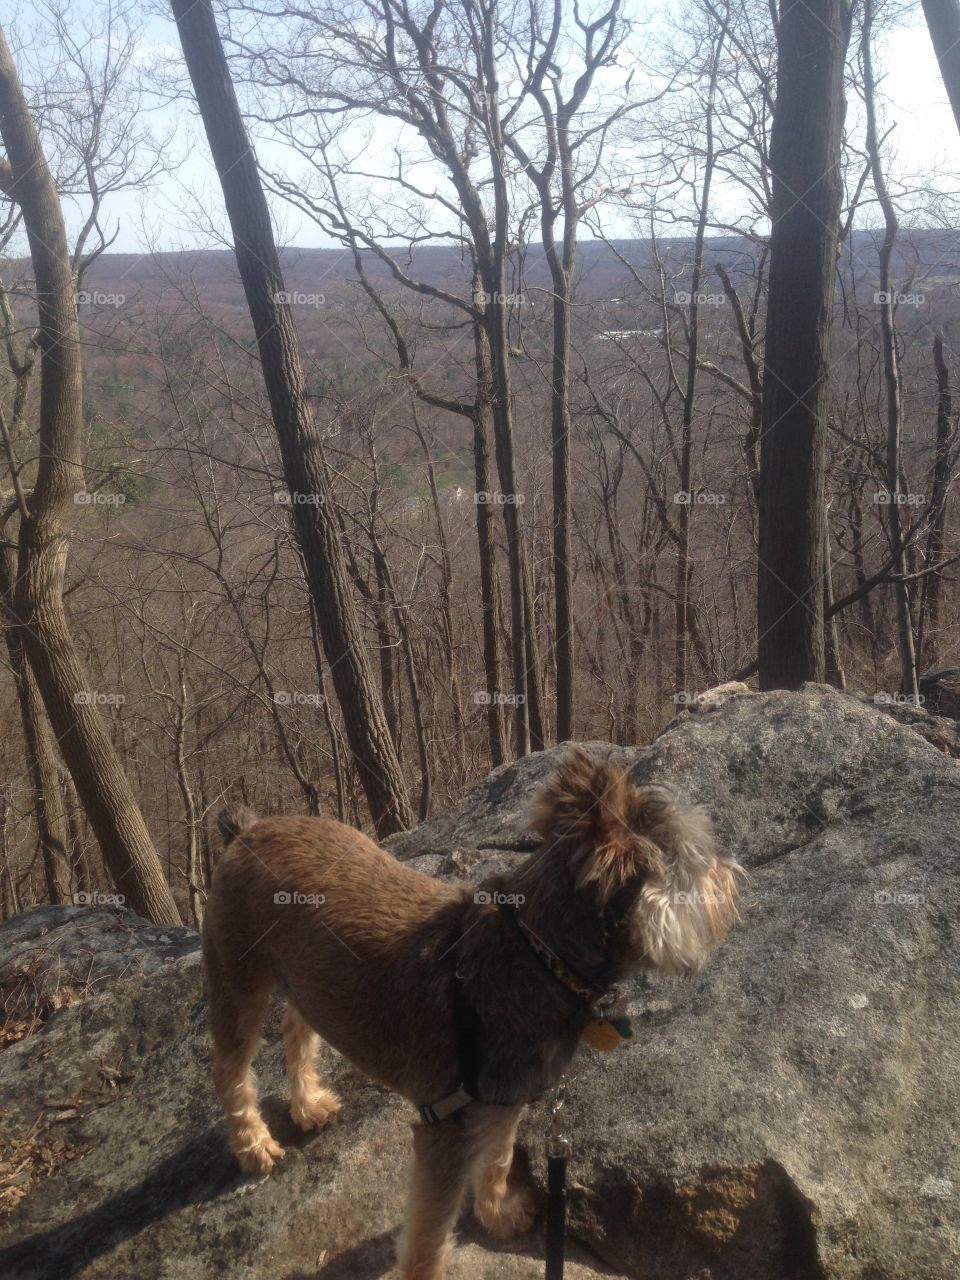 Spring hike with the pup